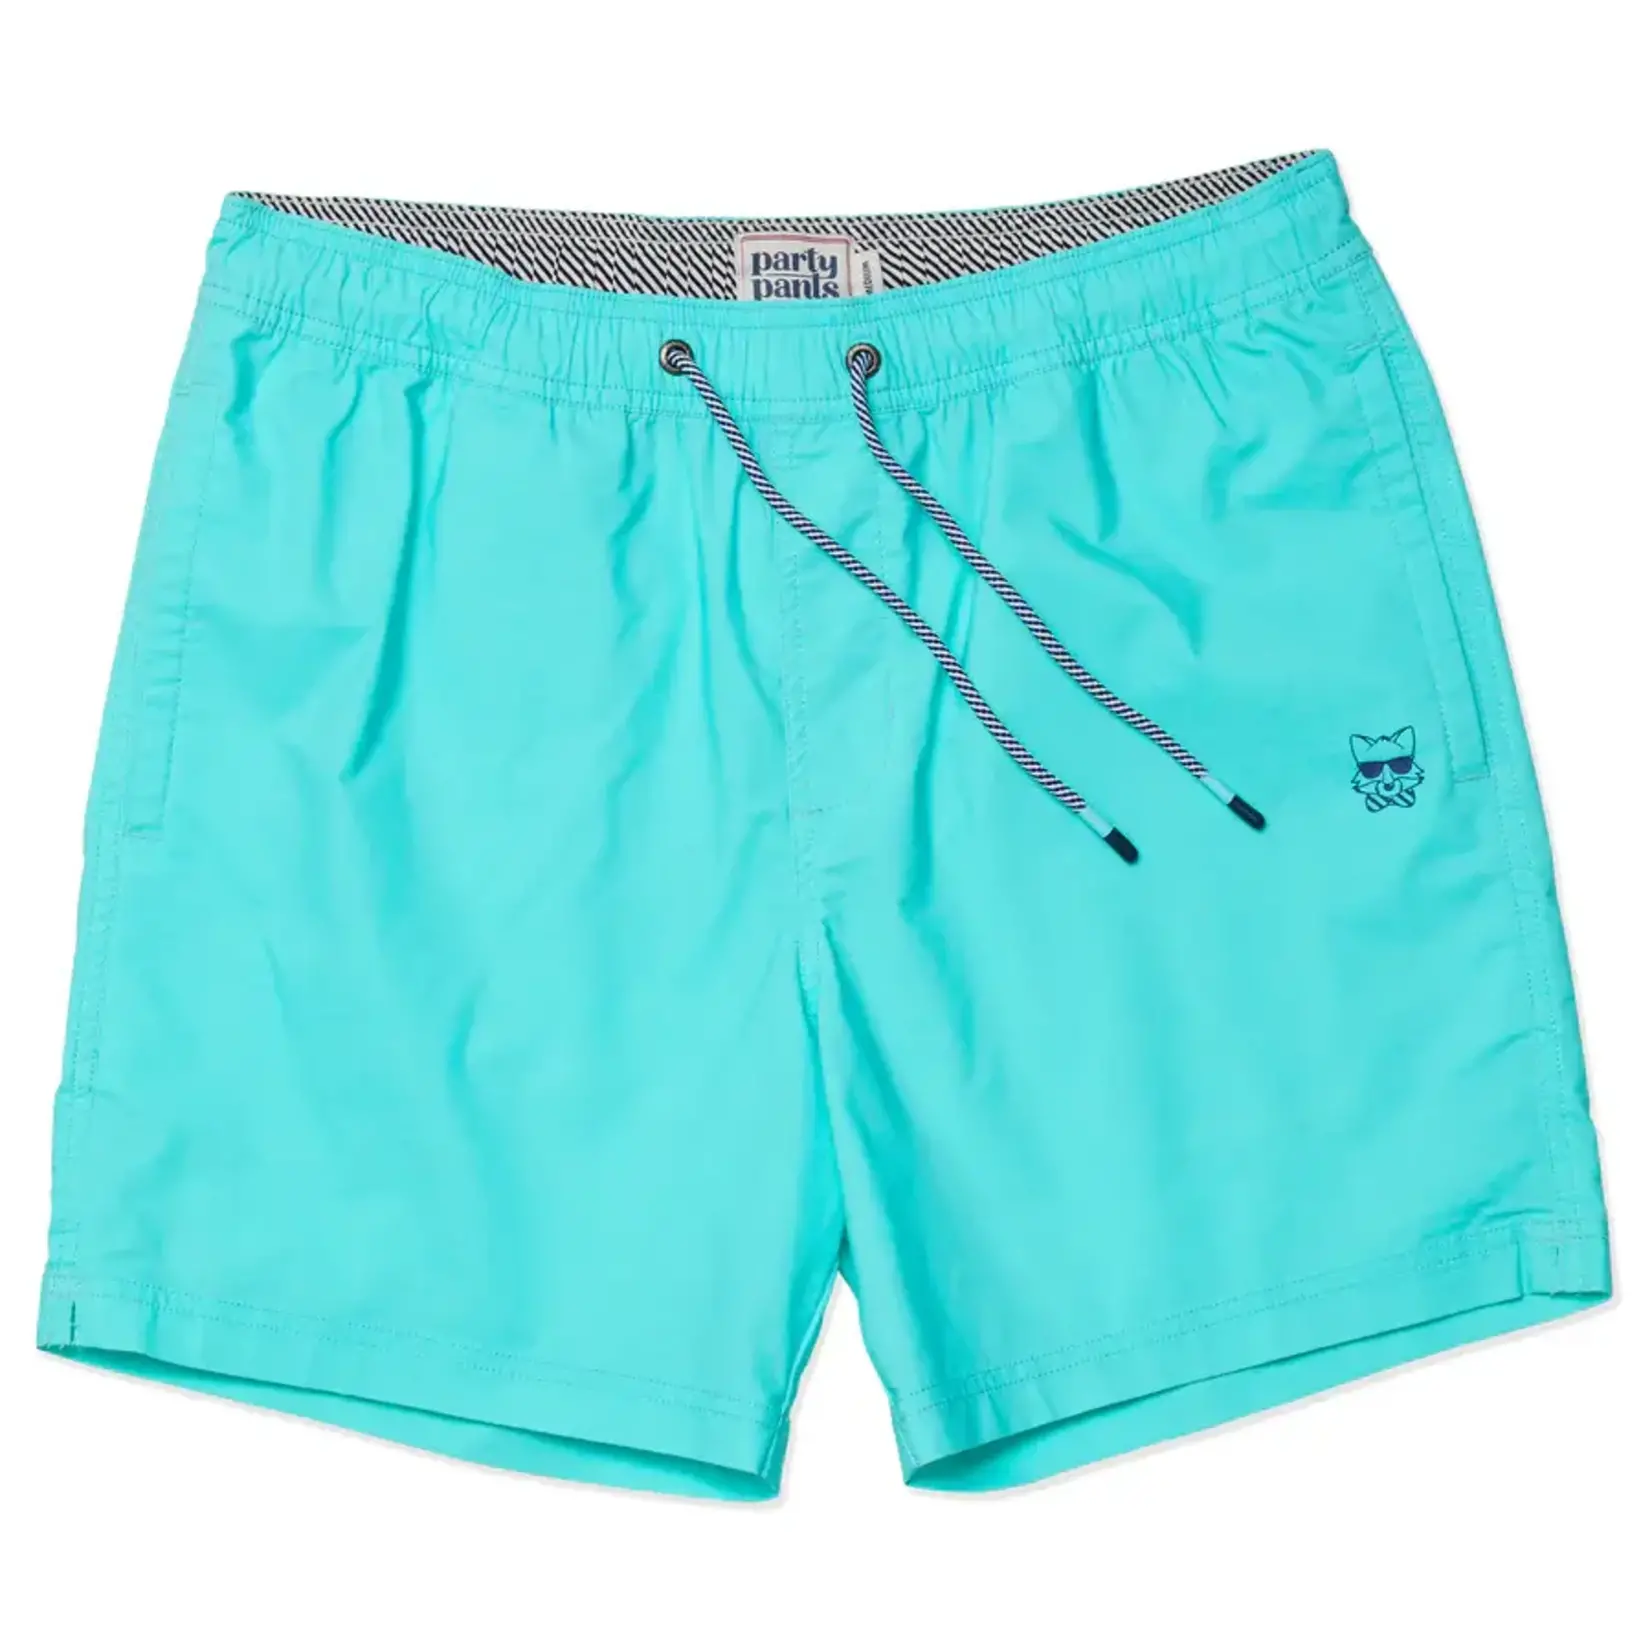 Party Pants Solids Shorts Mint Green